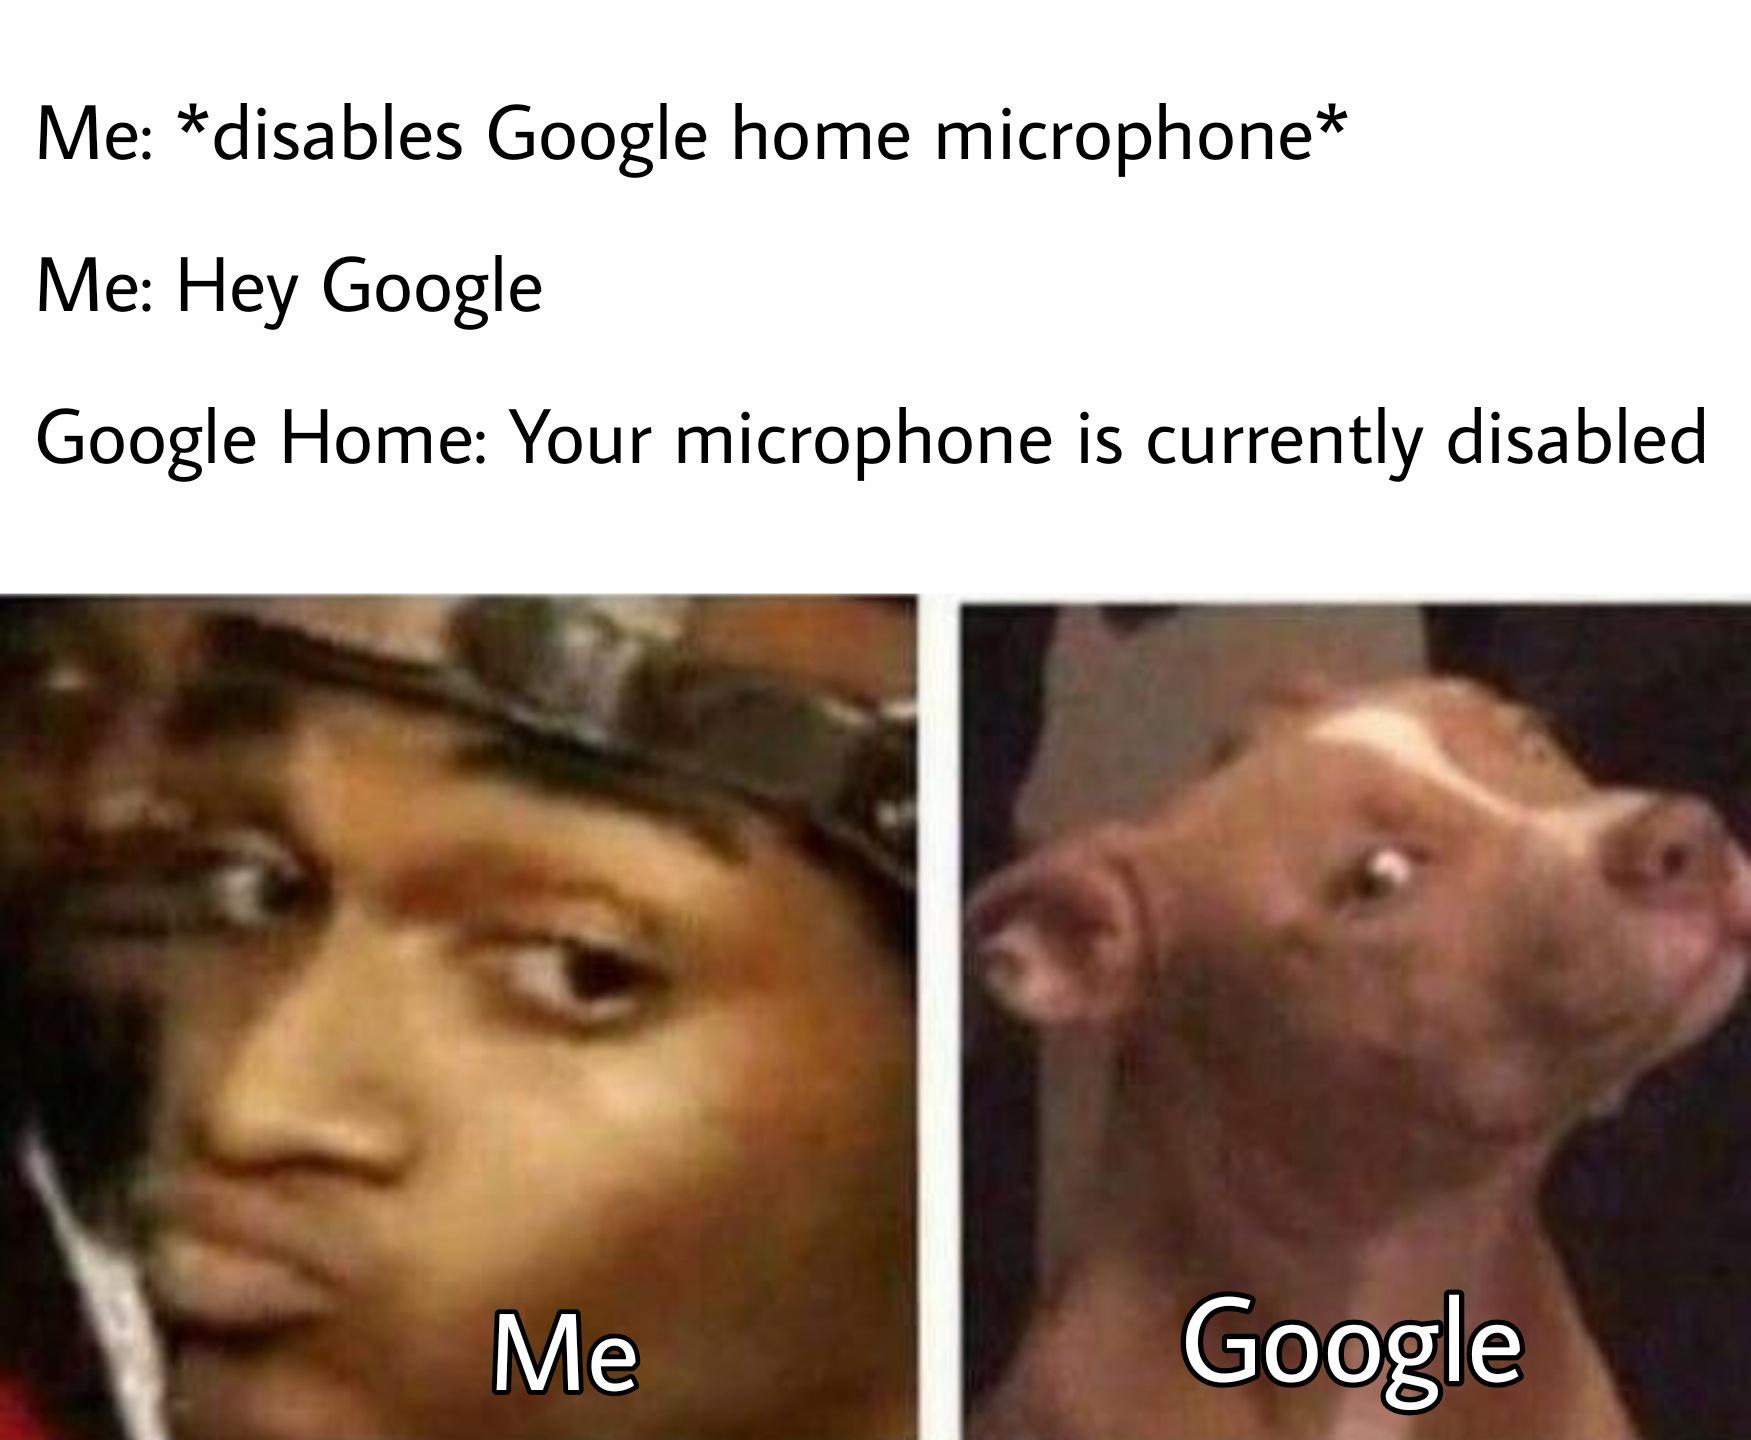 come in he don t bite - Me disables Google home microphone Me Hey Google Google Home Your microphone is currently disabled Me Google